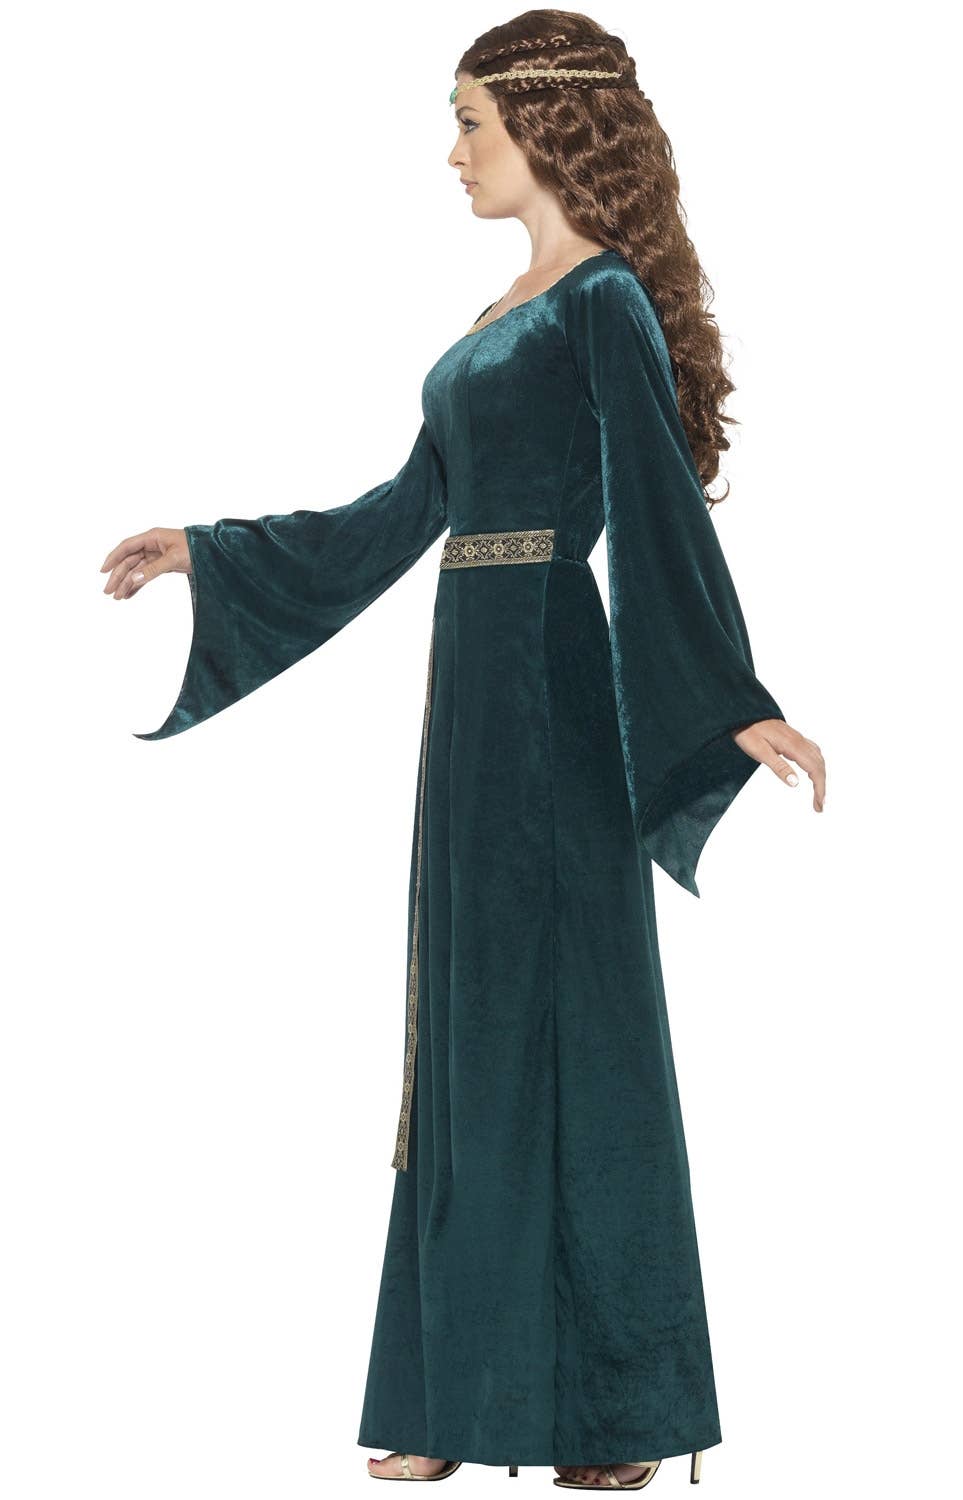 Green Medieval Dress Women's Costume Side View